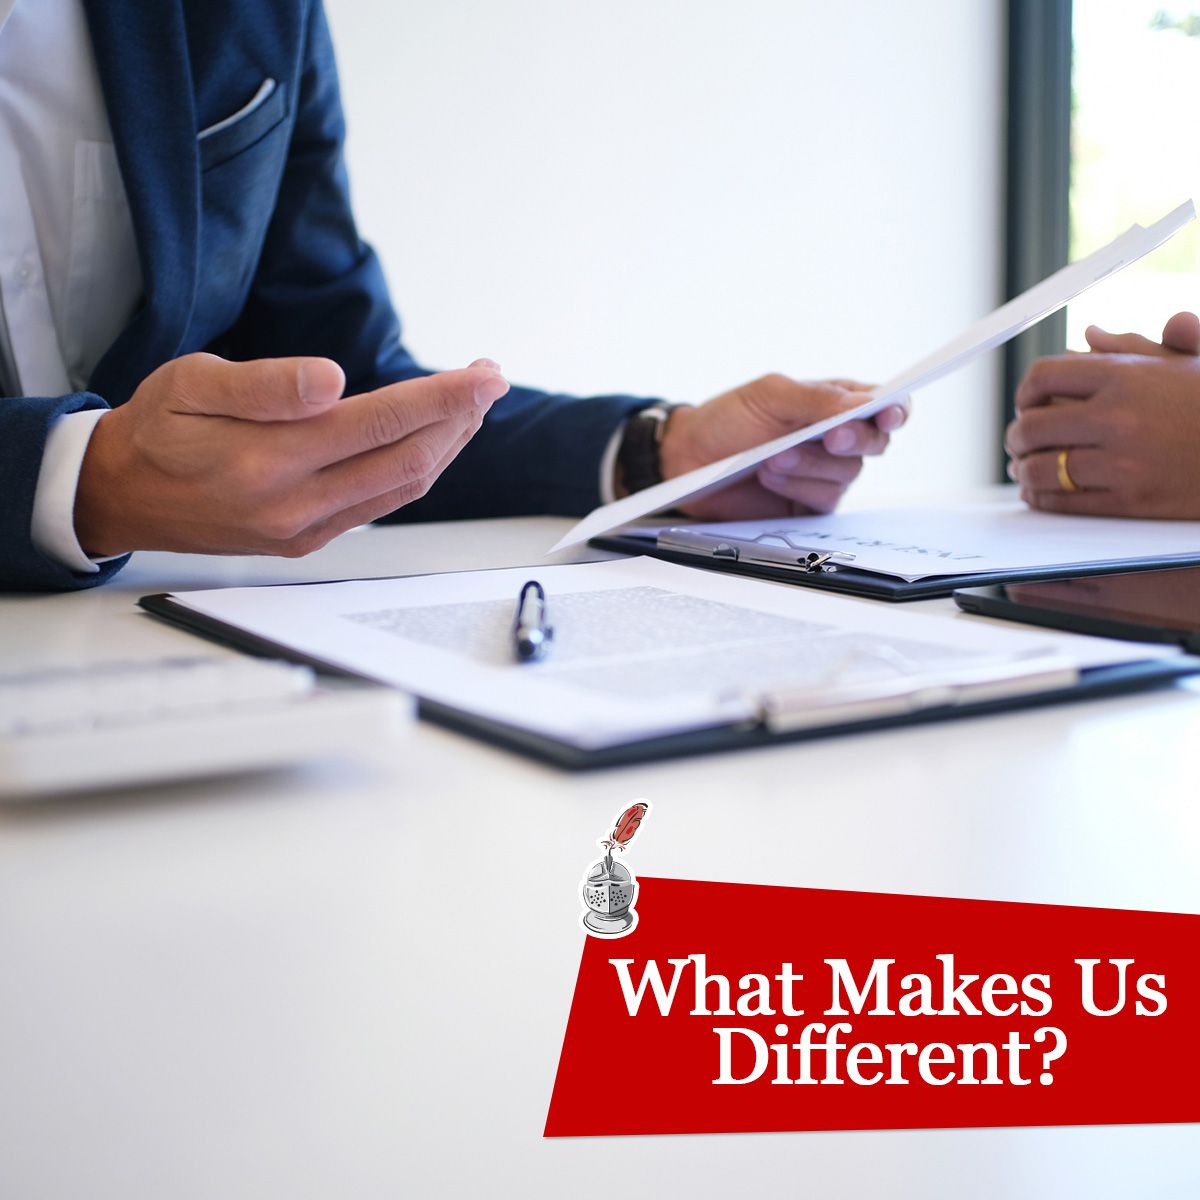 What Makes Us Different?